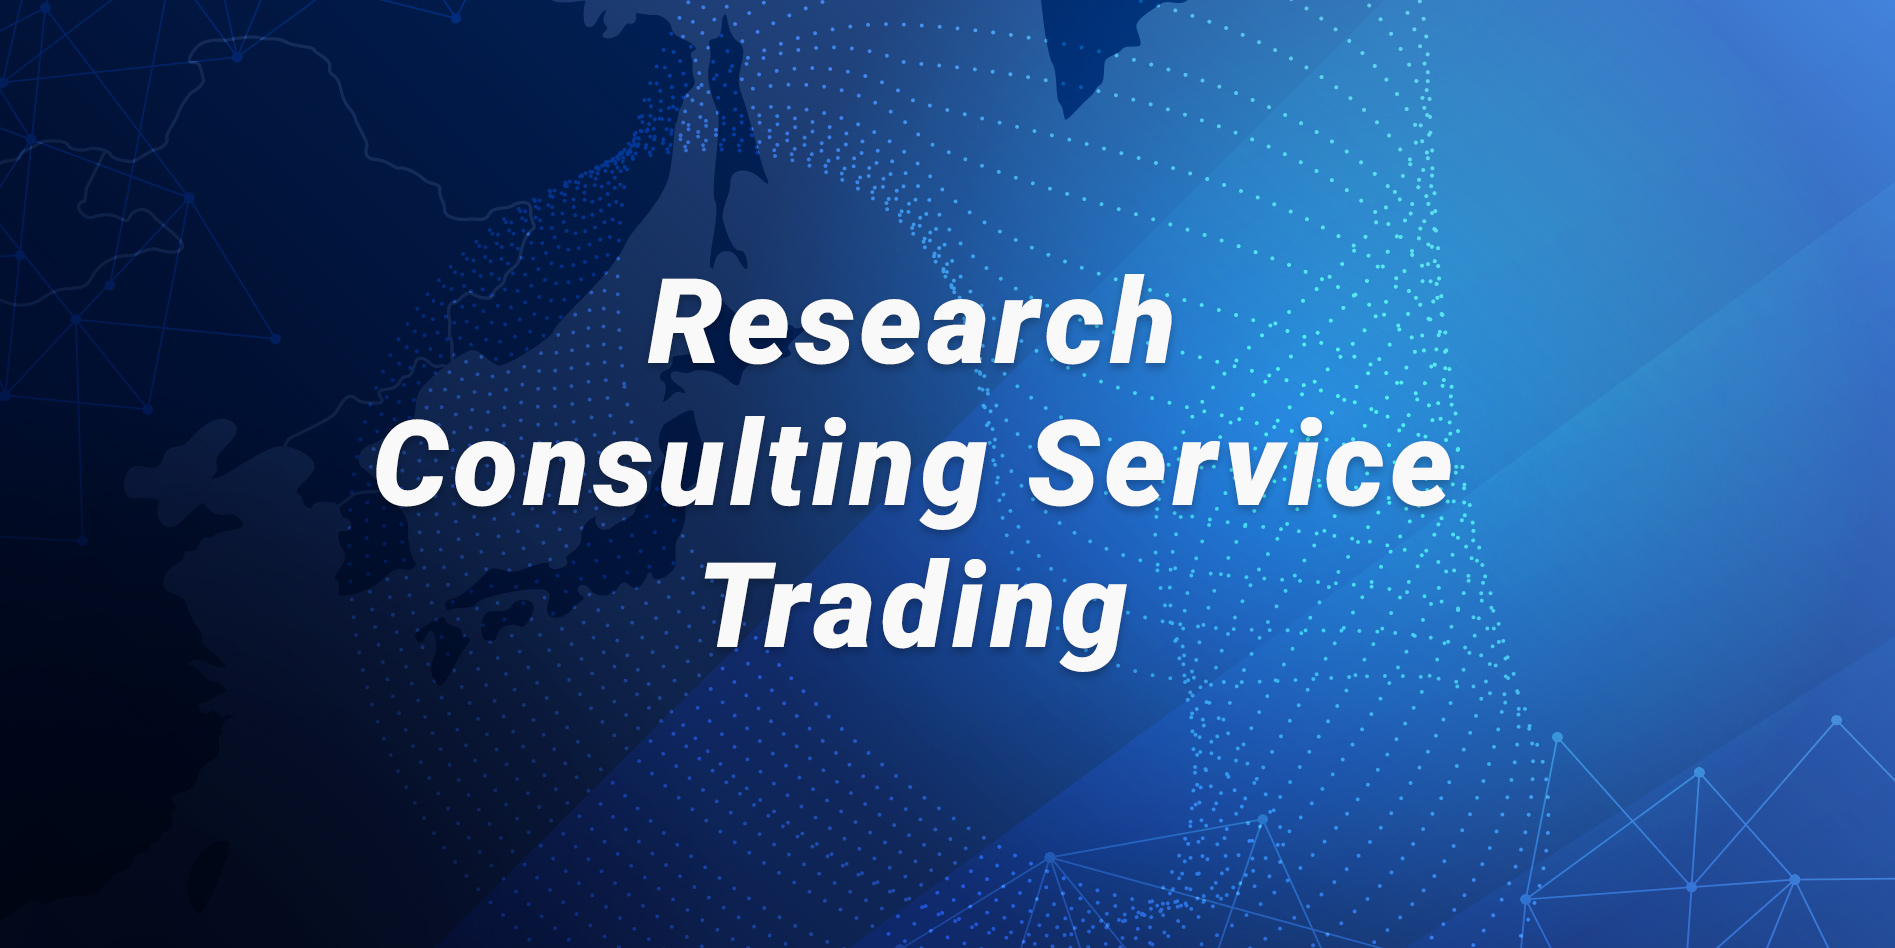 Research and Consulting service